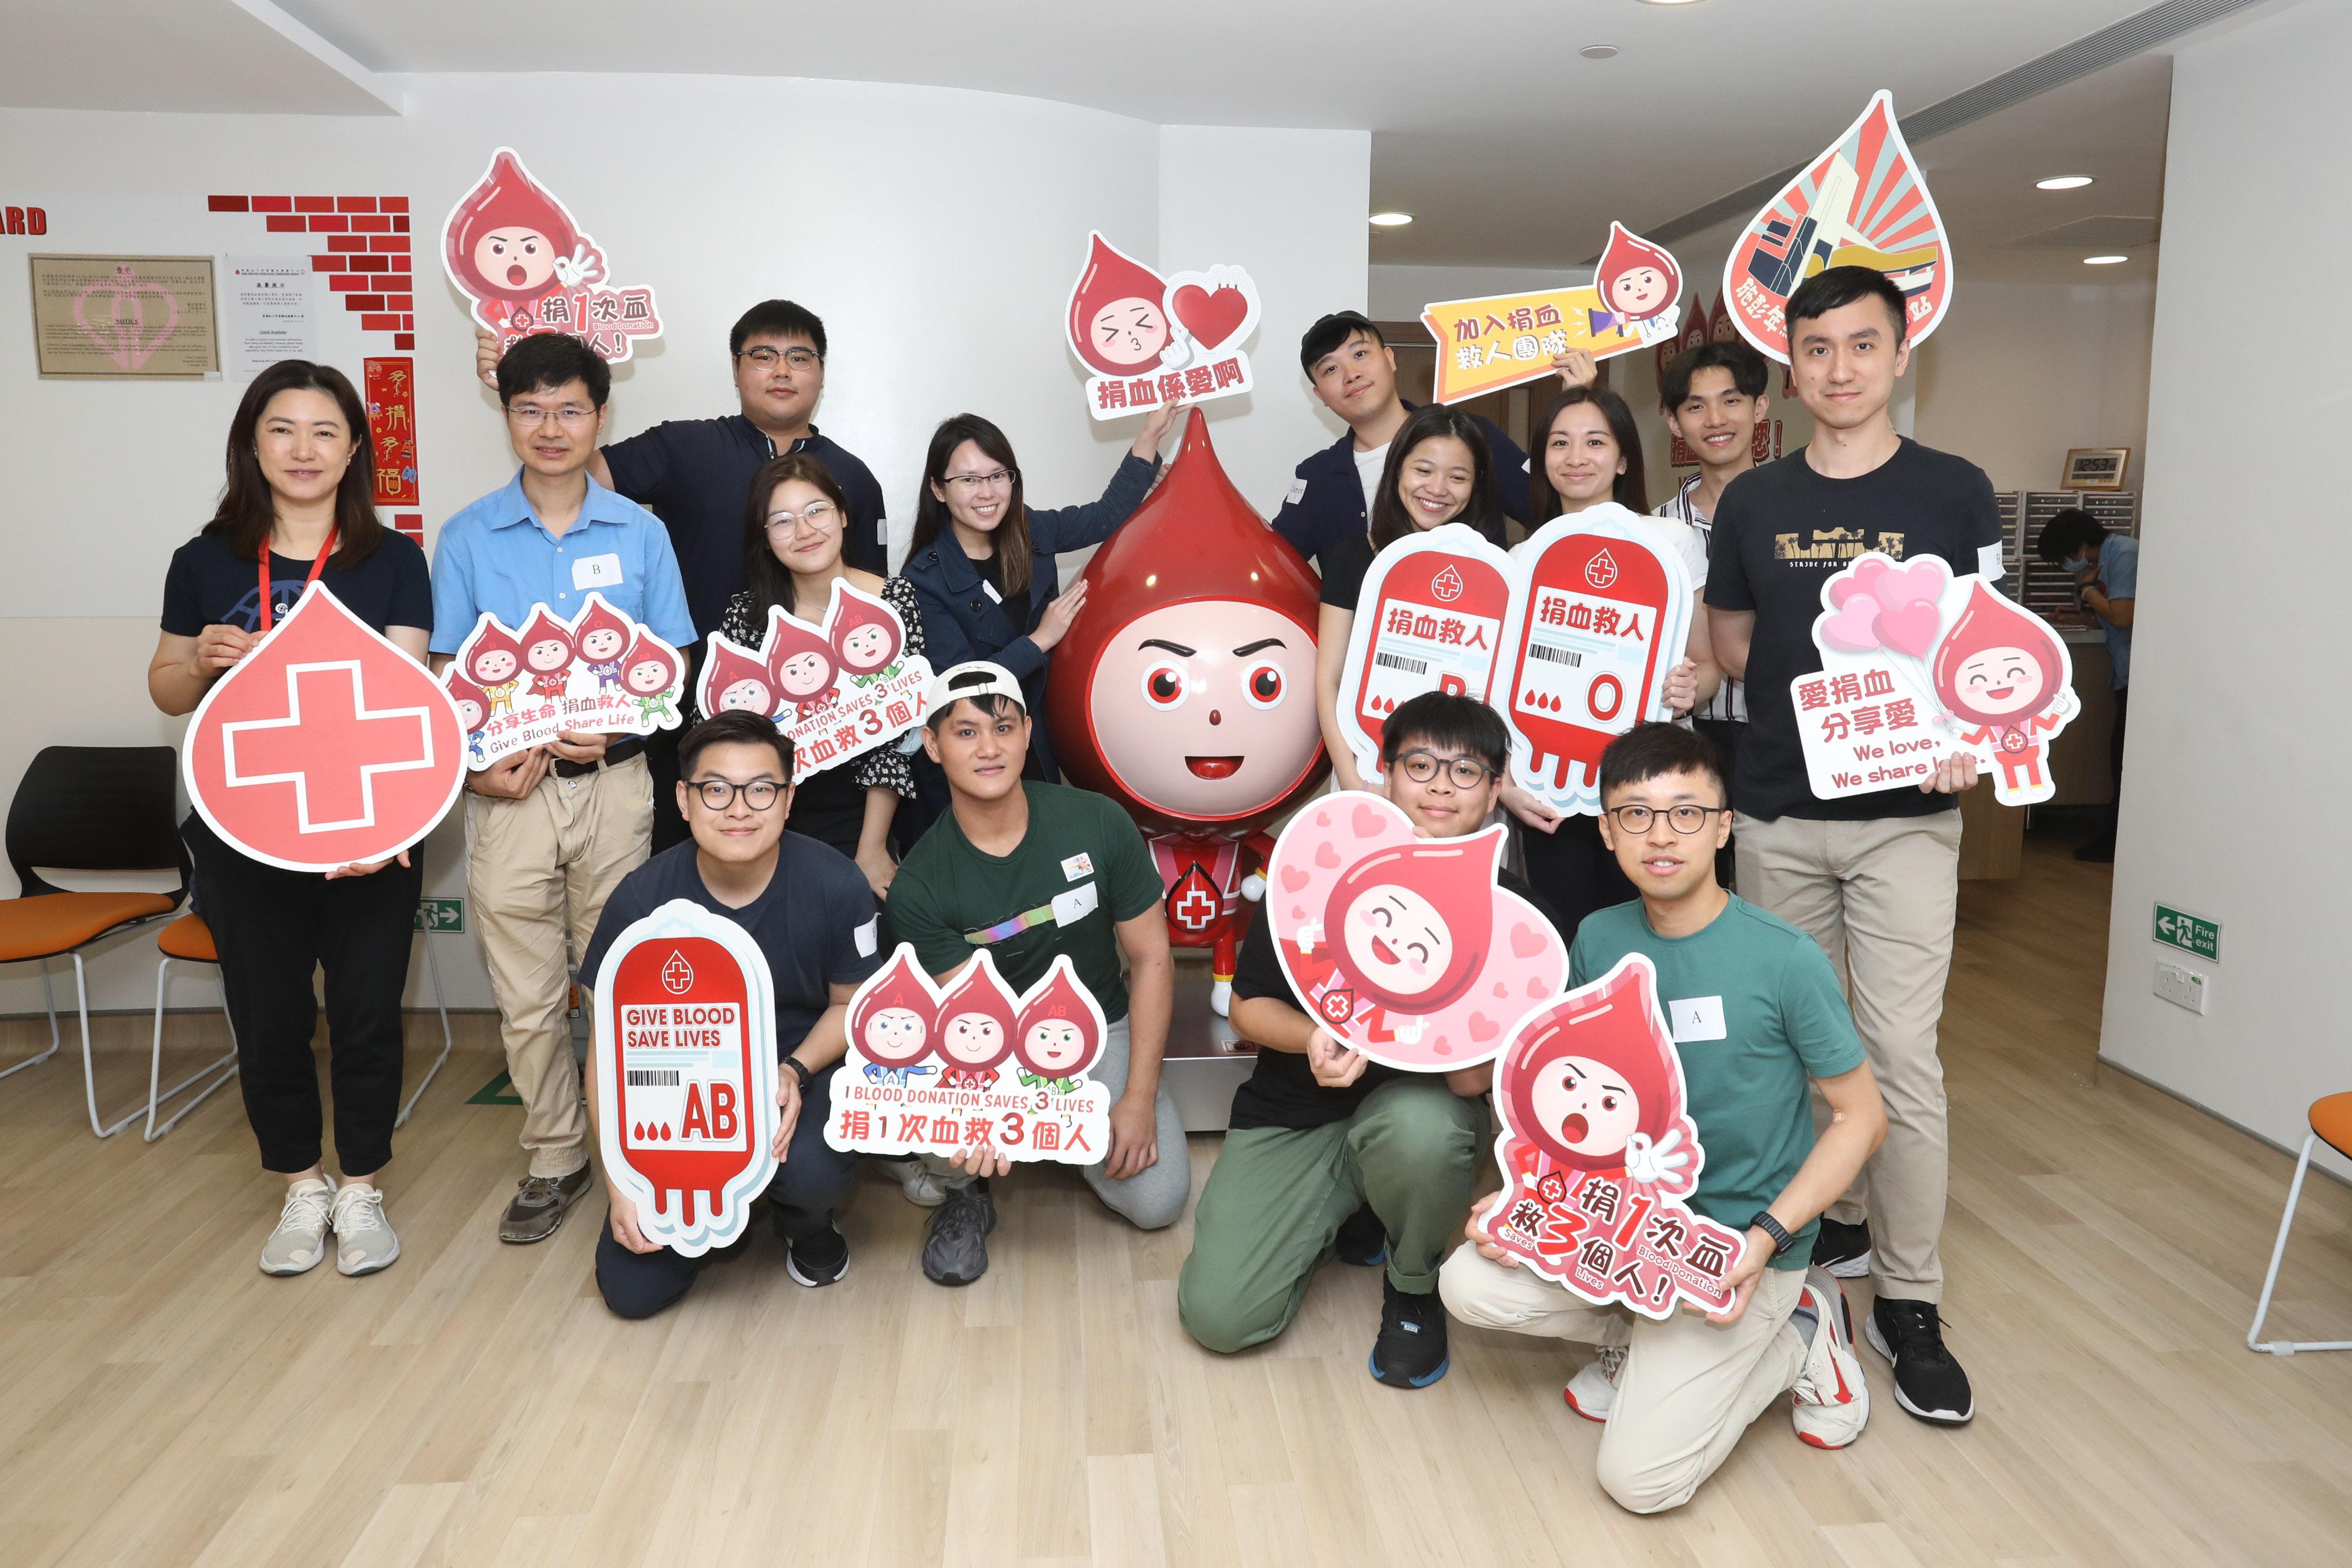 The Hong Kong Red Cross Blood Transfusion Service today (May 6) invited the YDC Youth Ambassadors (YAs) of the Home and Youth Affairs Bureau to join the "Learn About Blood Tour". Photo shows the YAs joining "Captain Blood" to promote the mission of "1 blood donation saves 3 lives" at the BTS Headquarters Donor Centre.